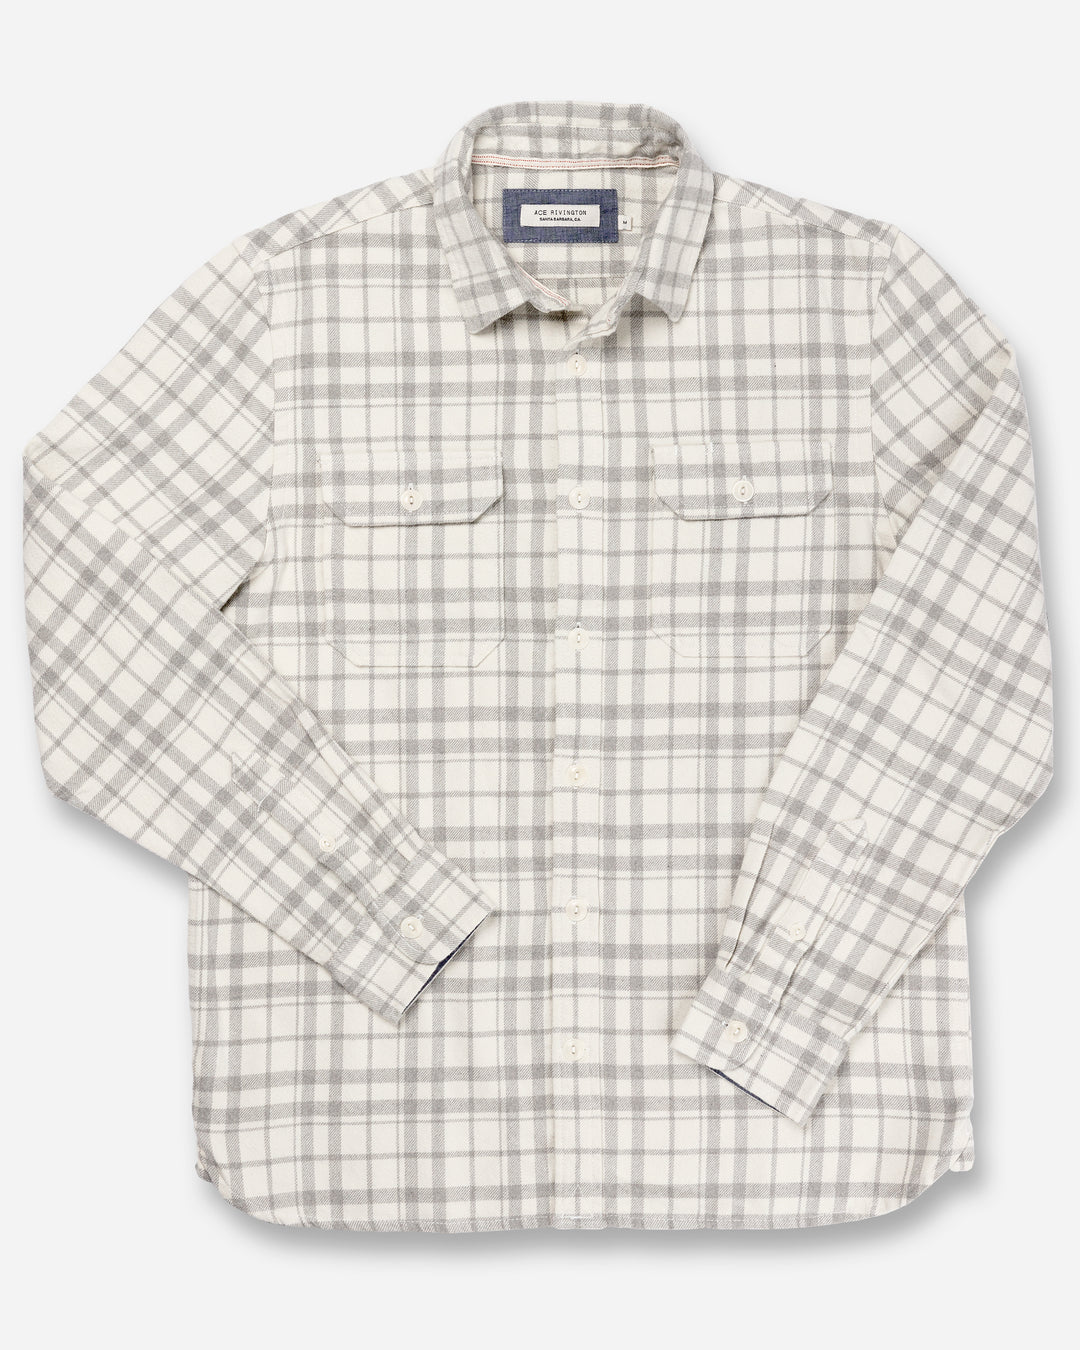 front of men's off white and grey soft bushed flannel shirt with overlaid arms